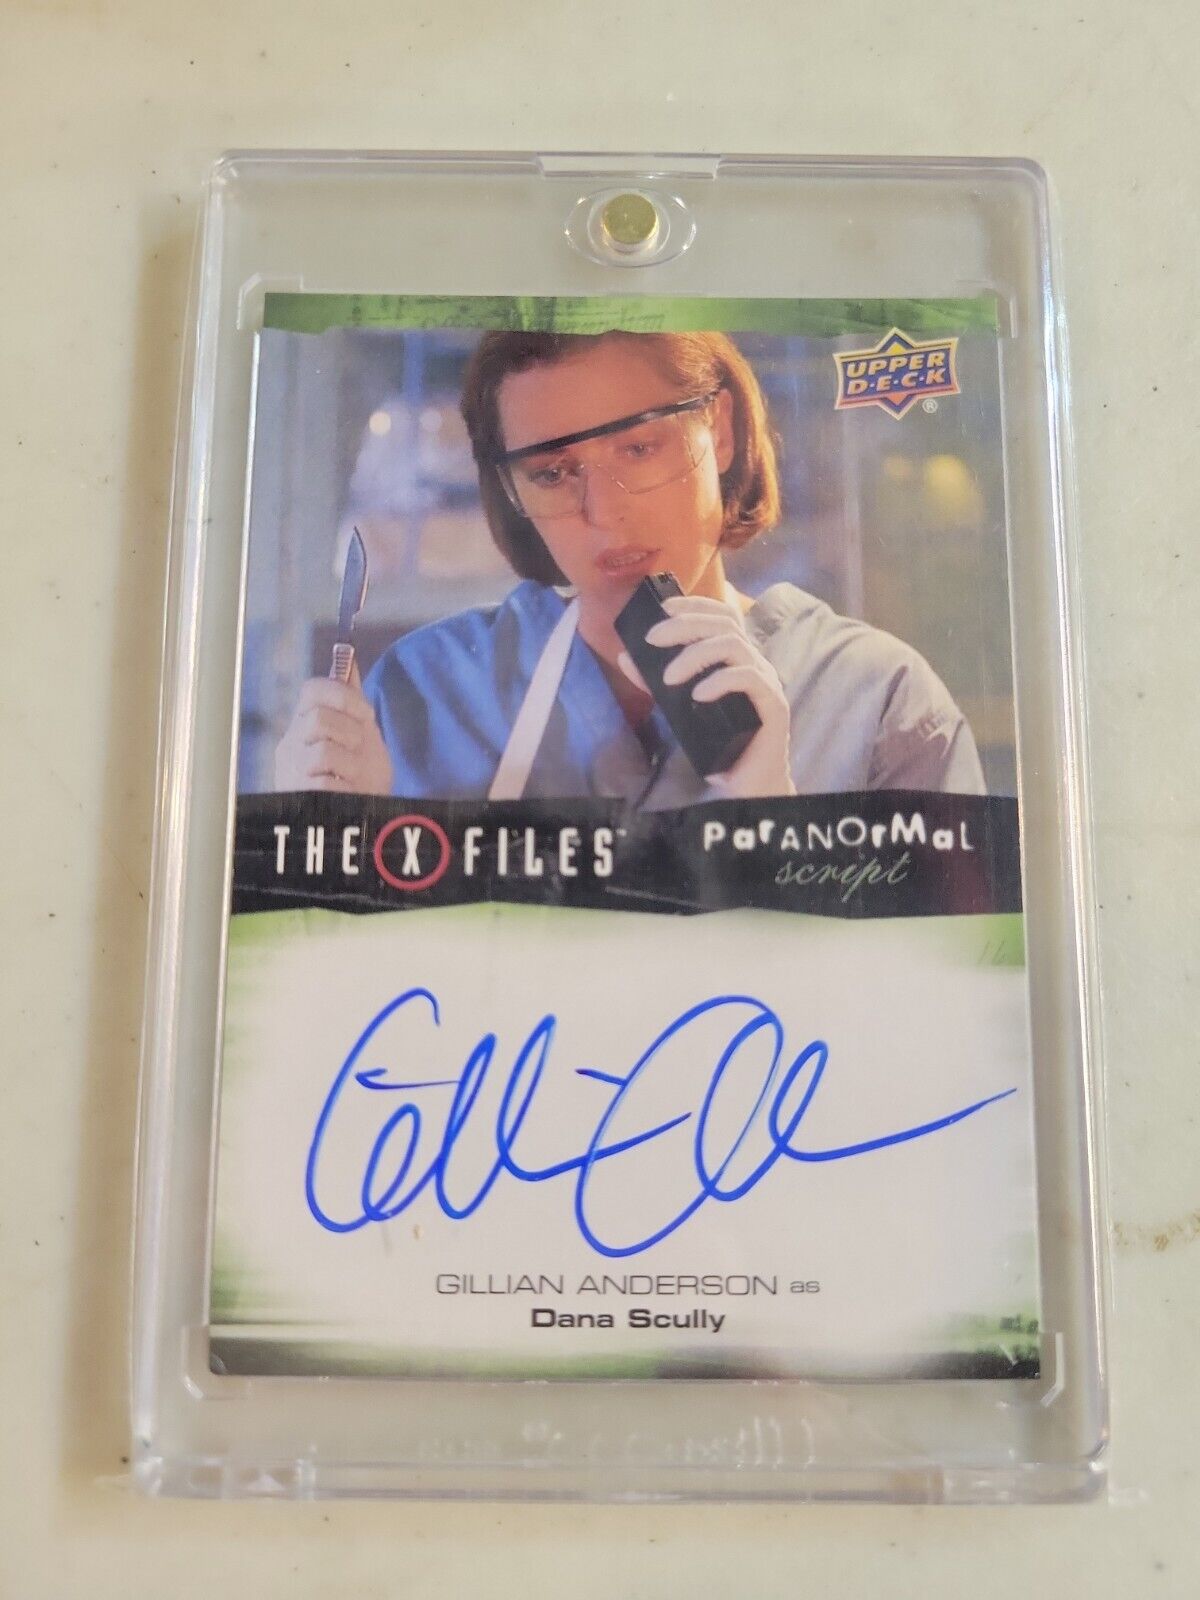 2019 Upper Deck X-Files UFOs and Aliens Autograph A-AN Gillian Anderson 